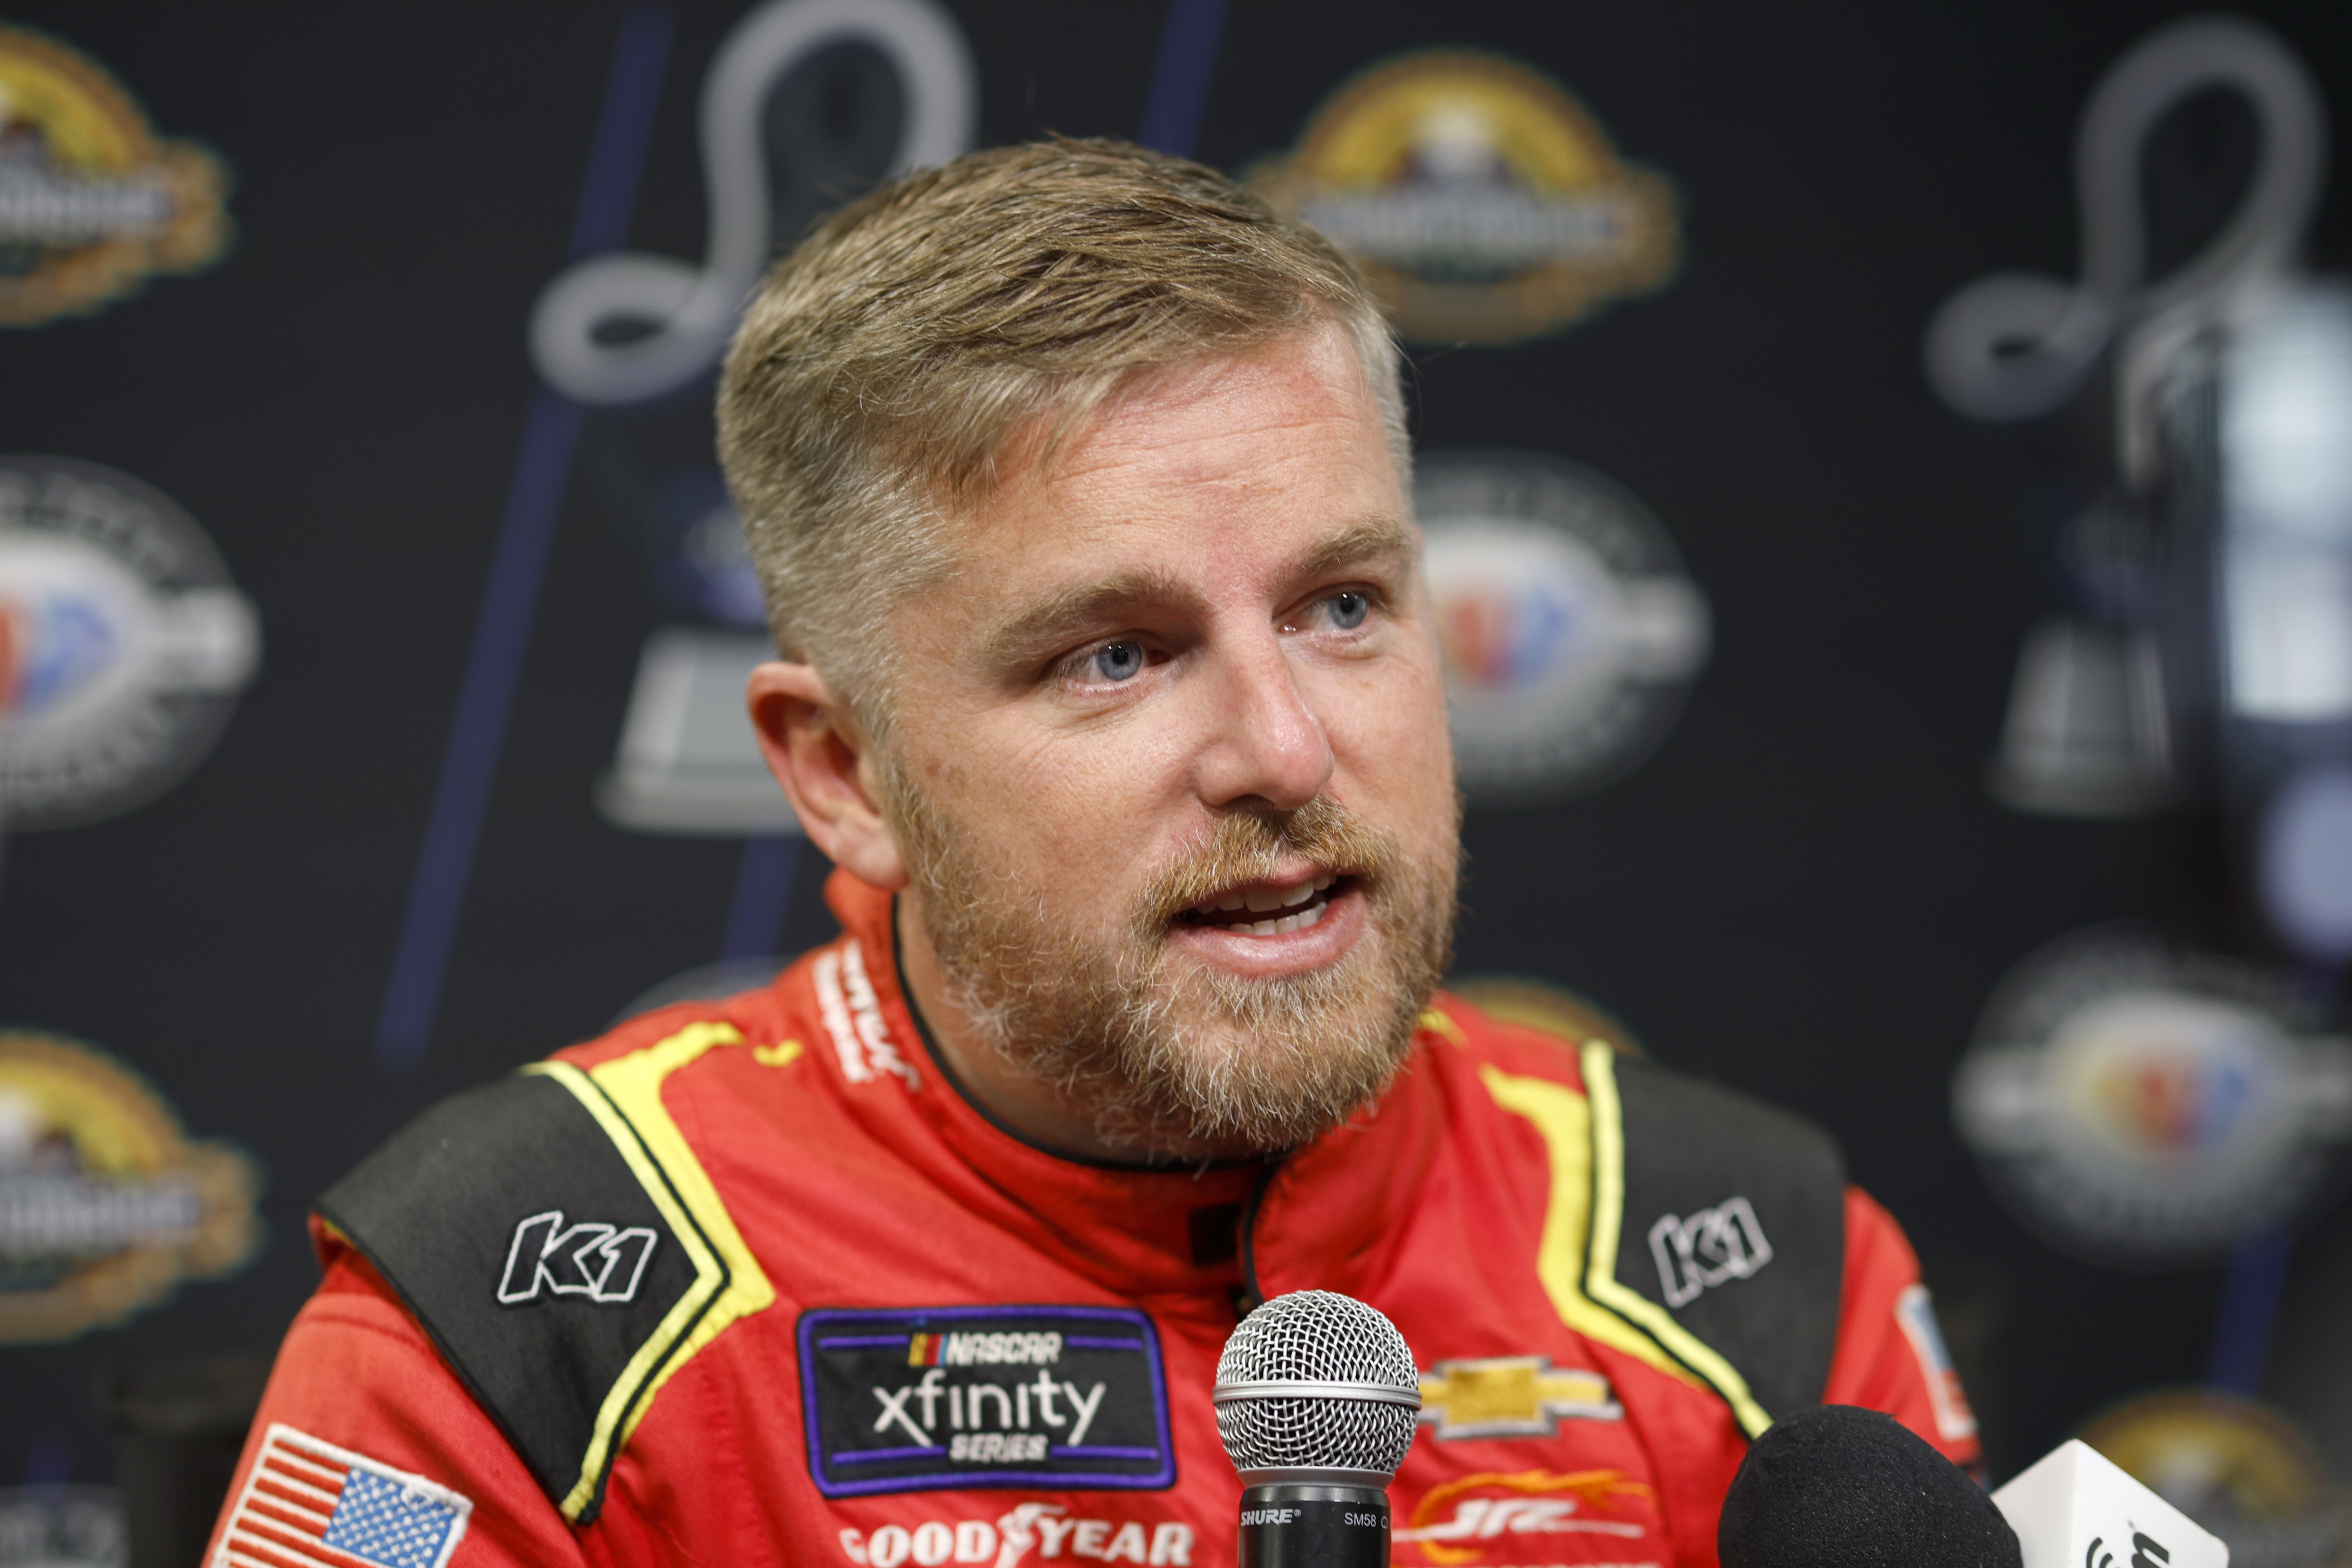 Justin Allgaier speaks to the media during Thursday's NASCAR Championship Media Day at Phoenix Raceway. (Photo by Sean Gardner/Getty Images)